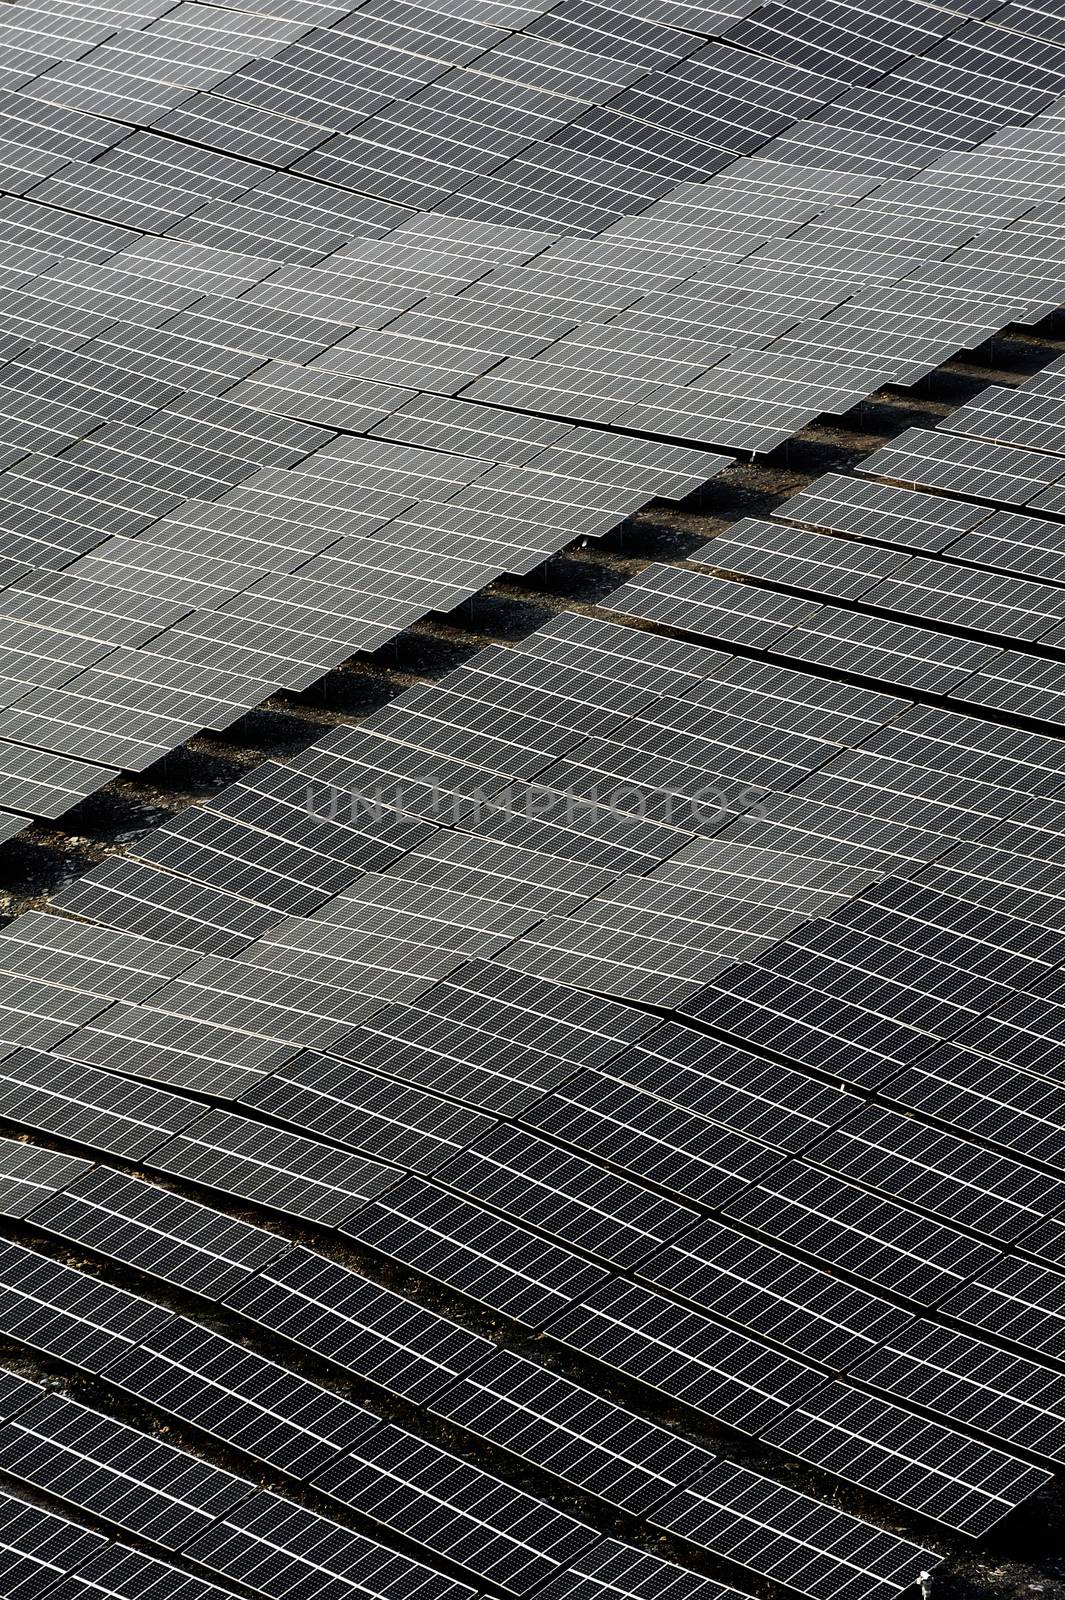 French photovoltaic solar plant by gillespaire